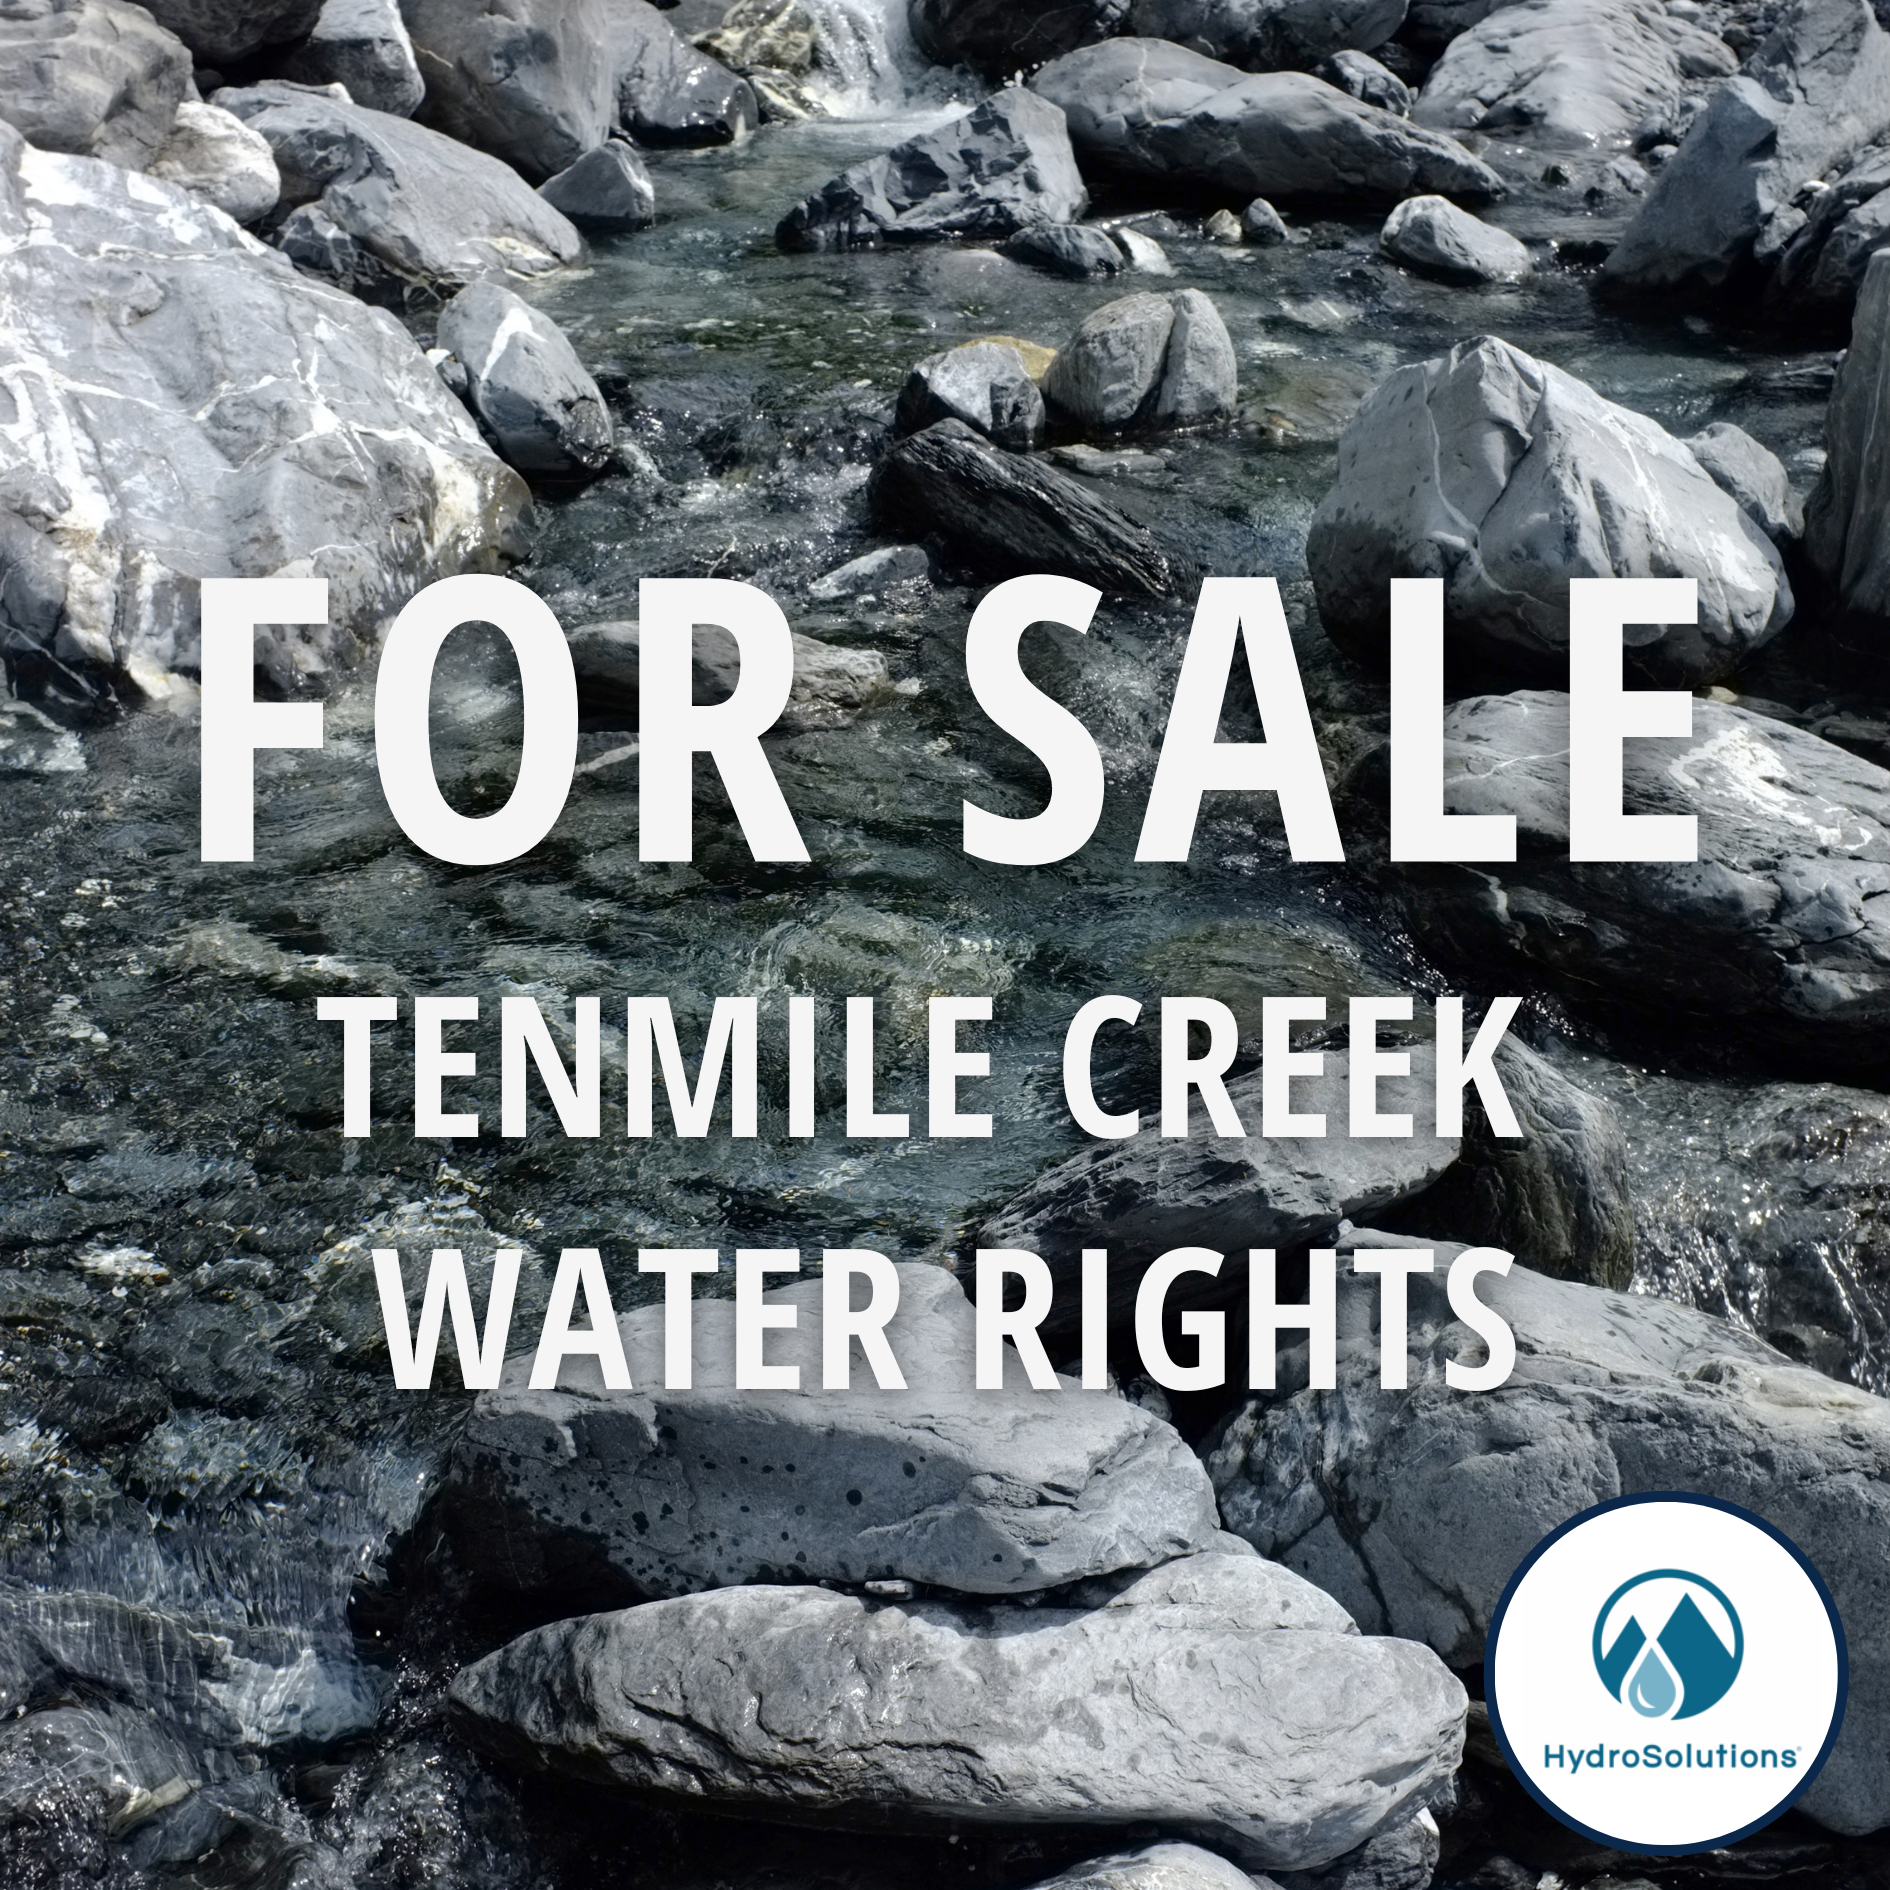 Tenmile Creek Water Rights For Sale - HydroSolutions